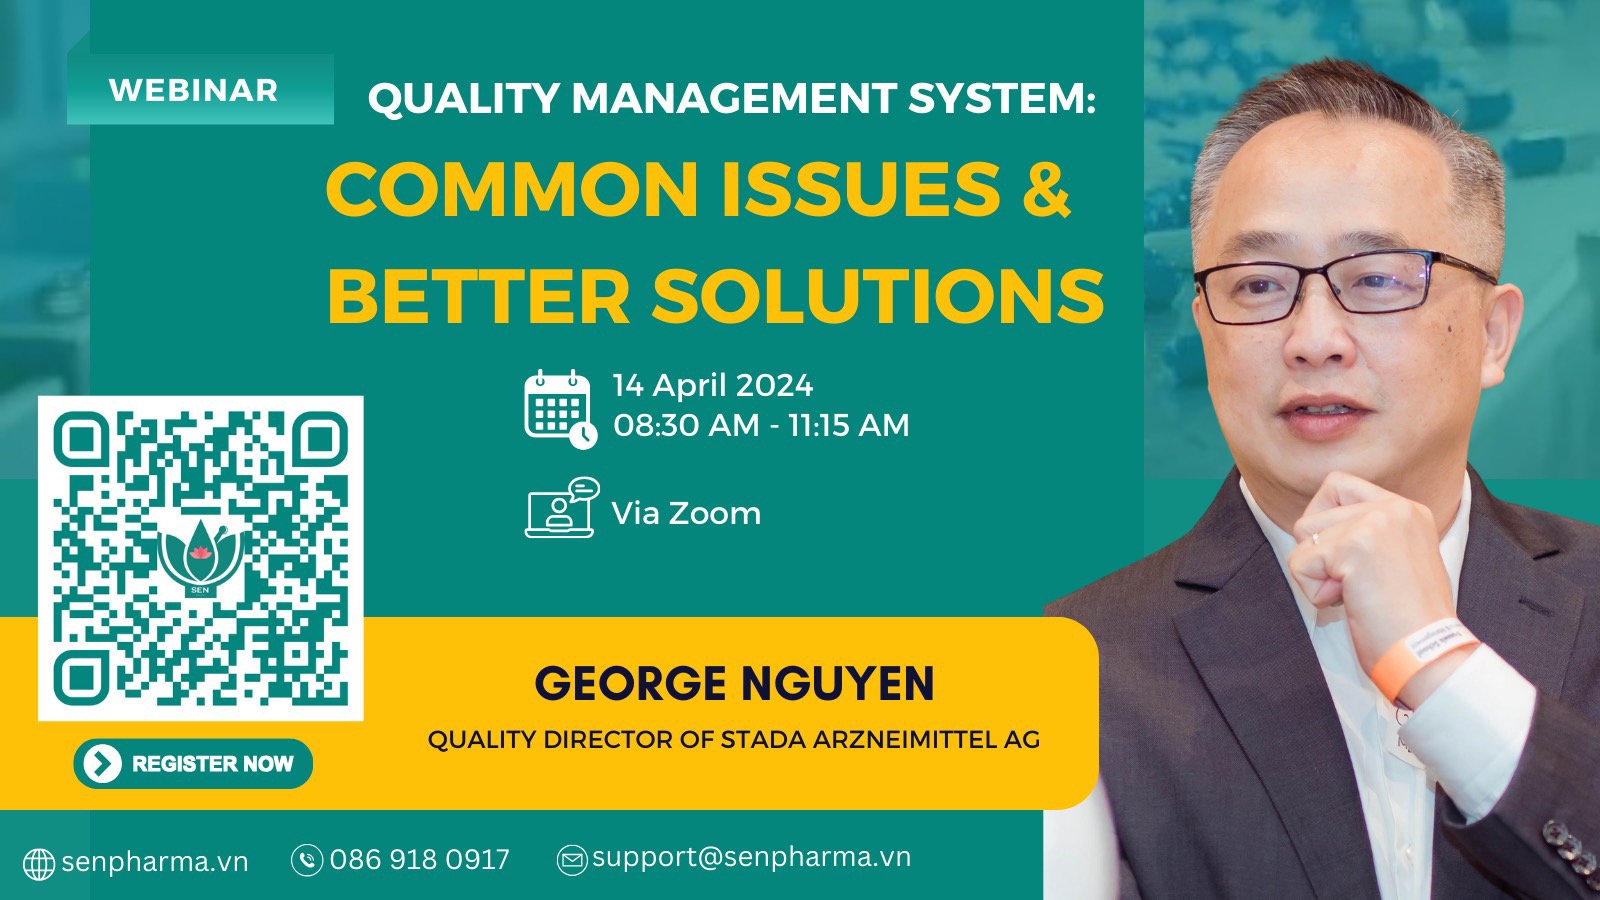 Webinar “Quality Management System: Common Issues And Better Solutions”